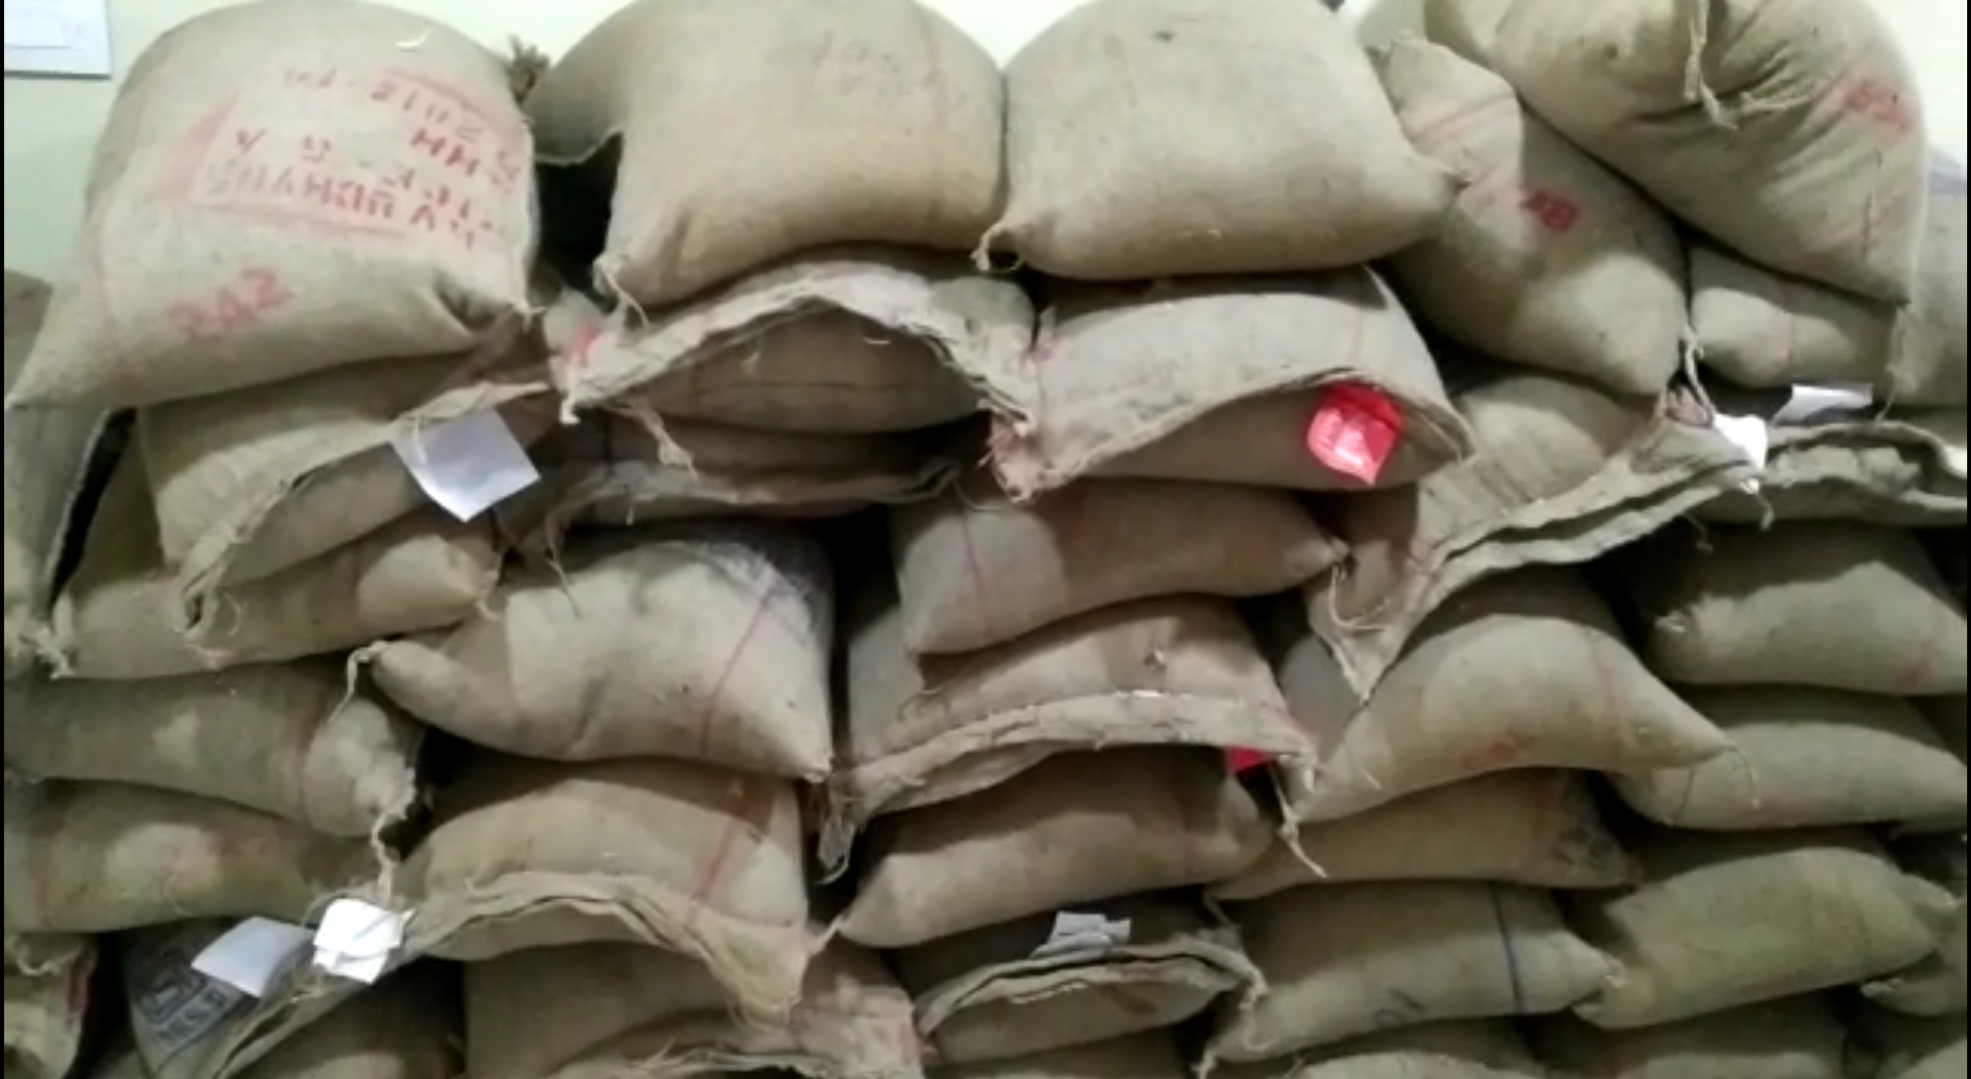 Police seized the rice of the government scheme along with a thief